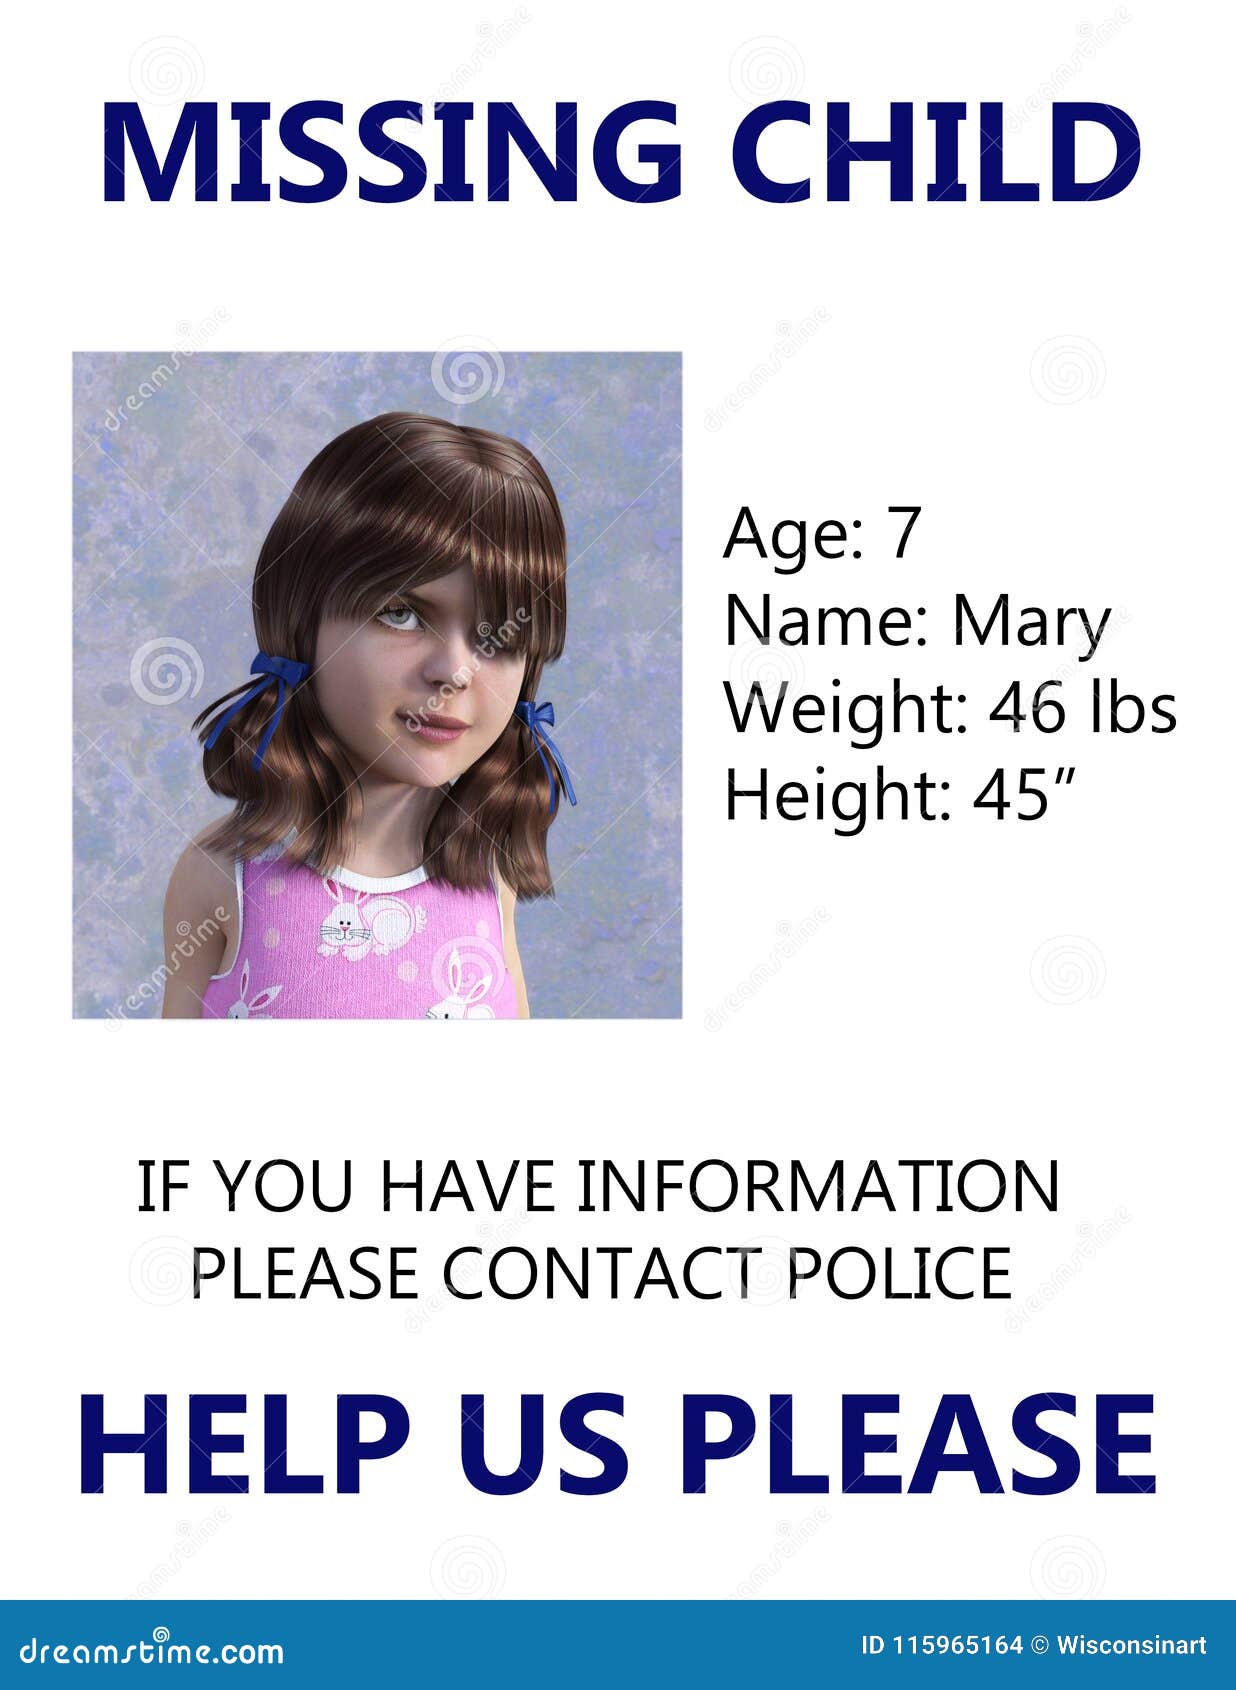 missing-child-poster-amber-alert-concept-young-girl-pictured-as-being-abducted-raped-murdered-exploitation-children-115965164 Heard Of The kidsafe id Effect? Here It Is